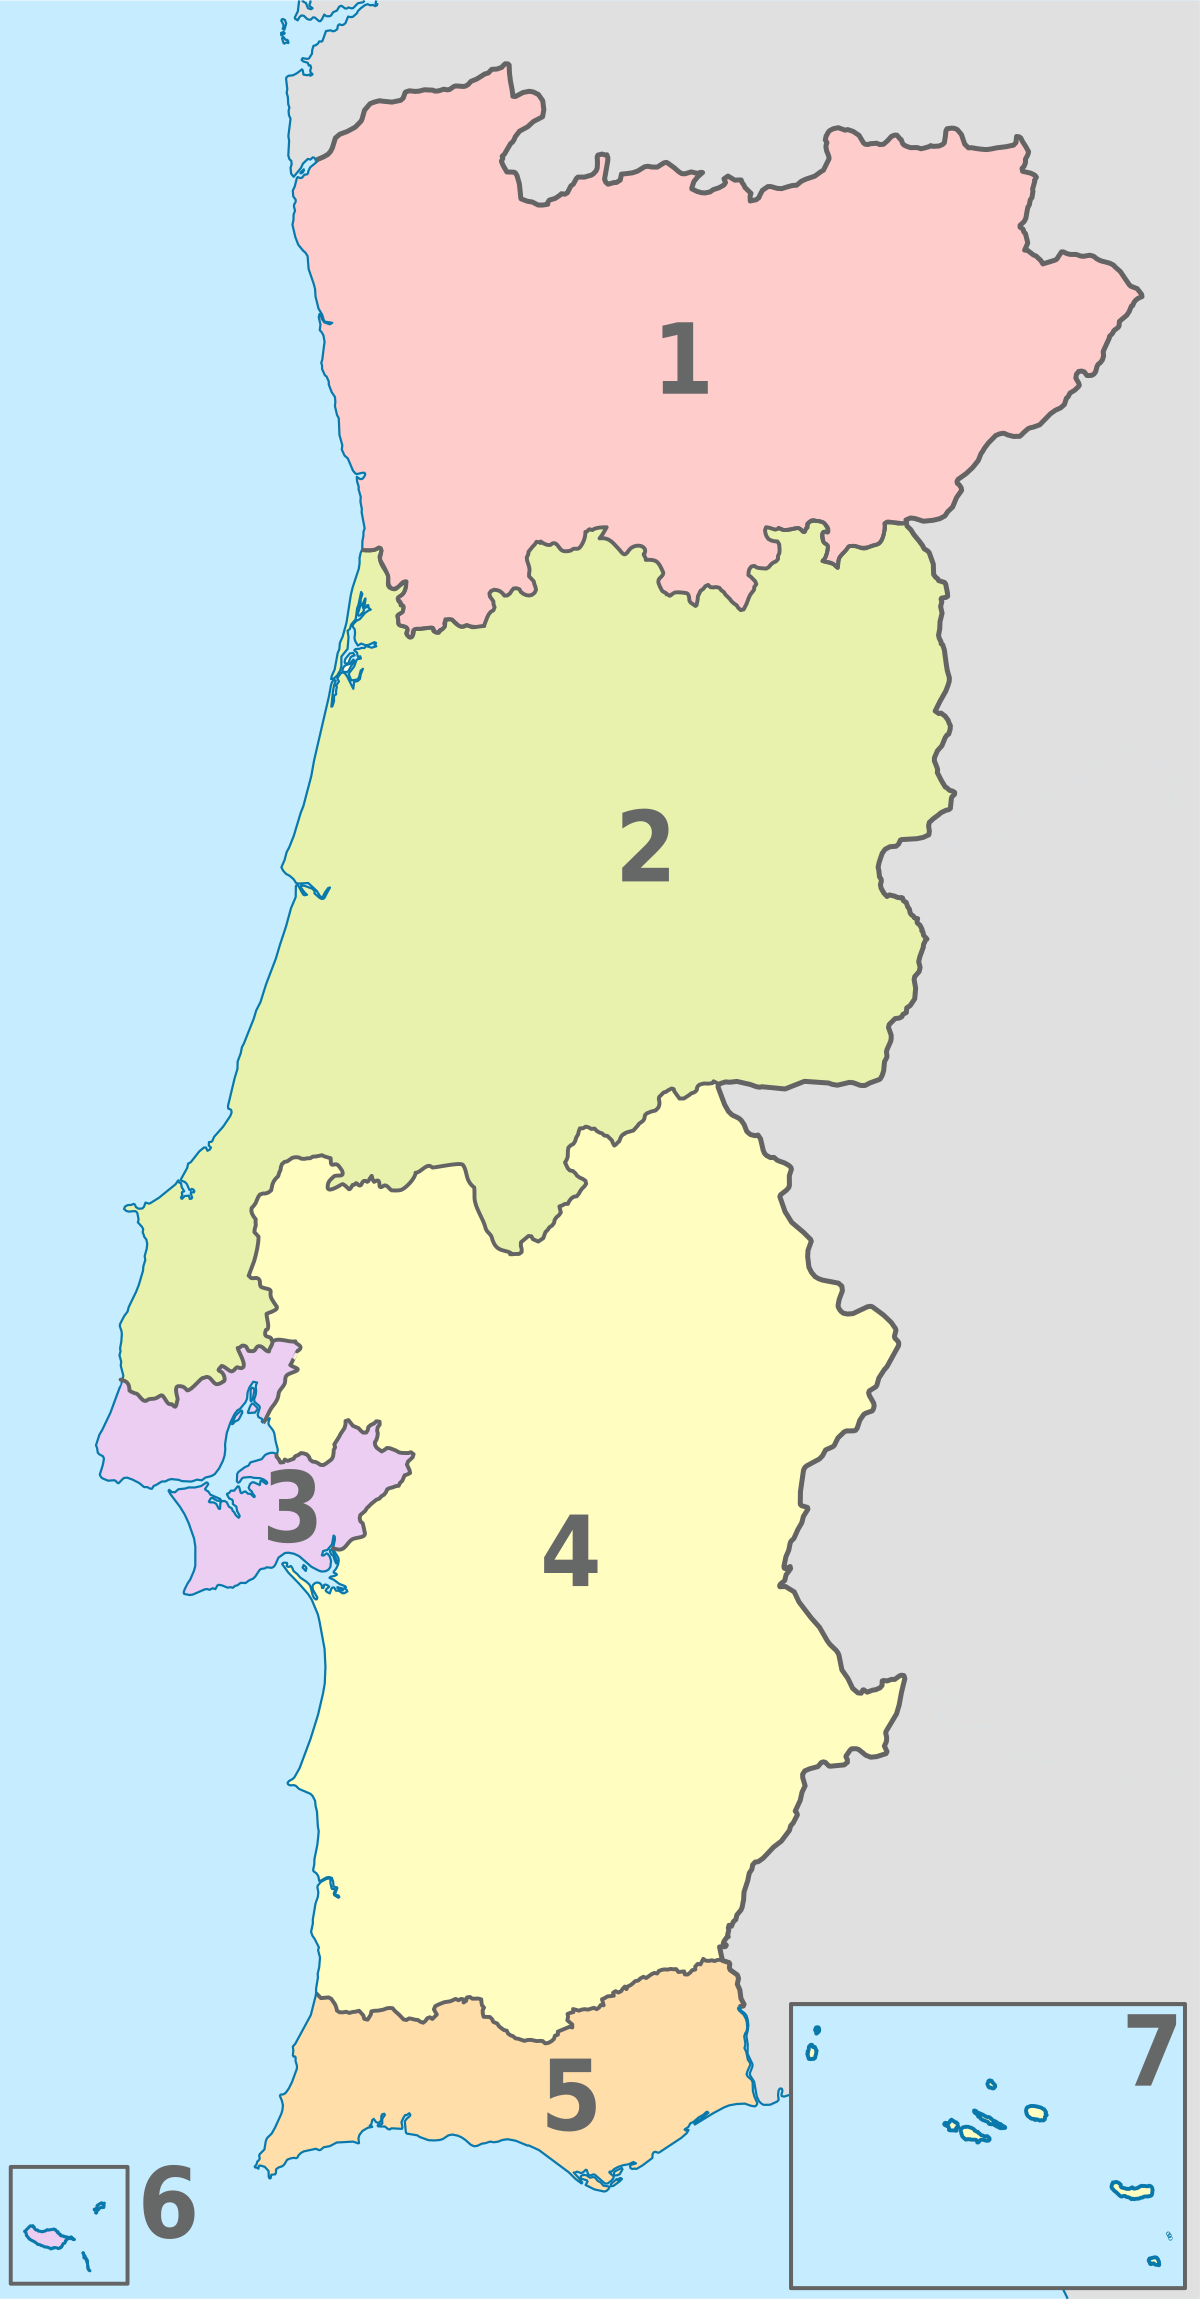 File:Map of Algarve, region of Portugal.svg - Wikimedia Commons